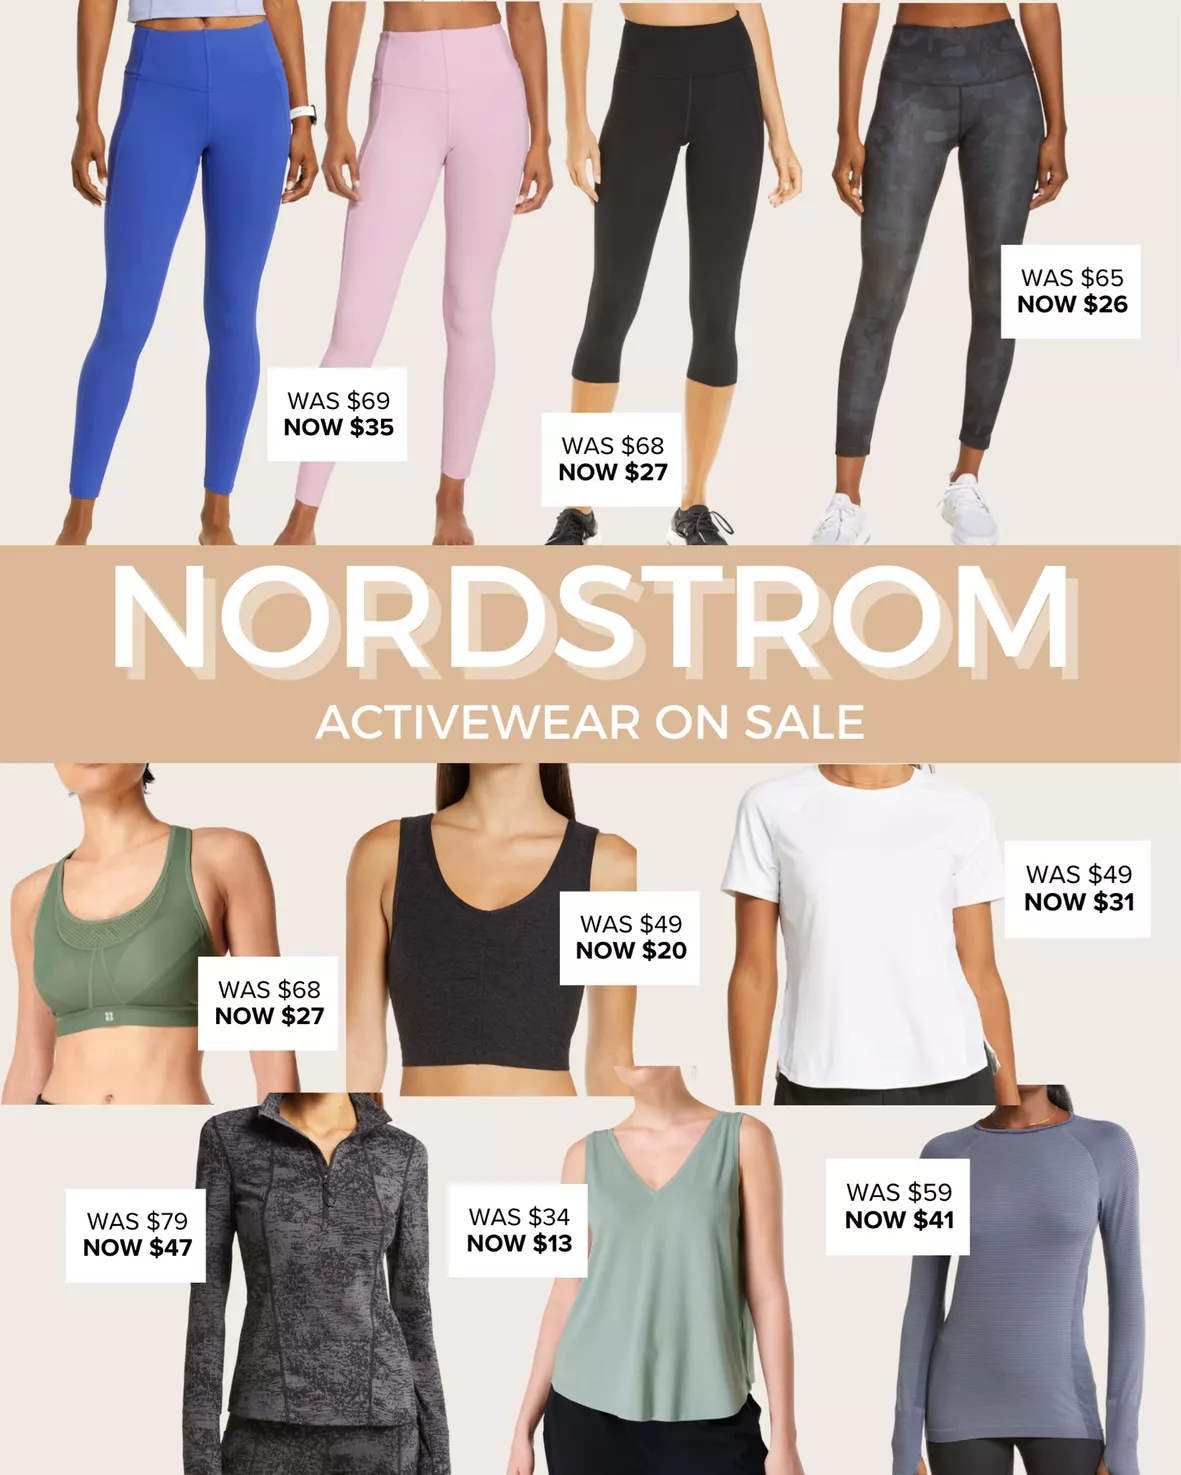 Women's Activewear Is on Sale at Nordstrom Right Now